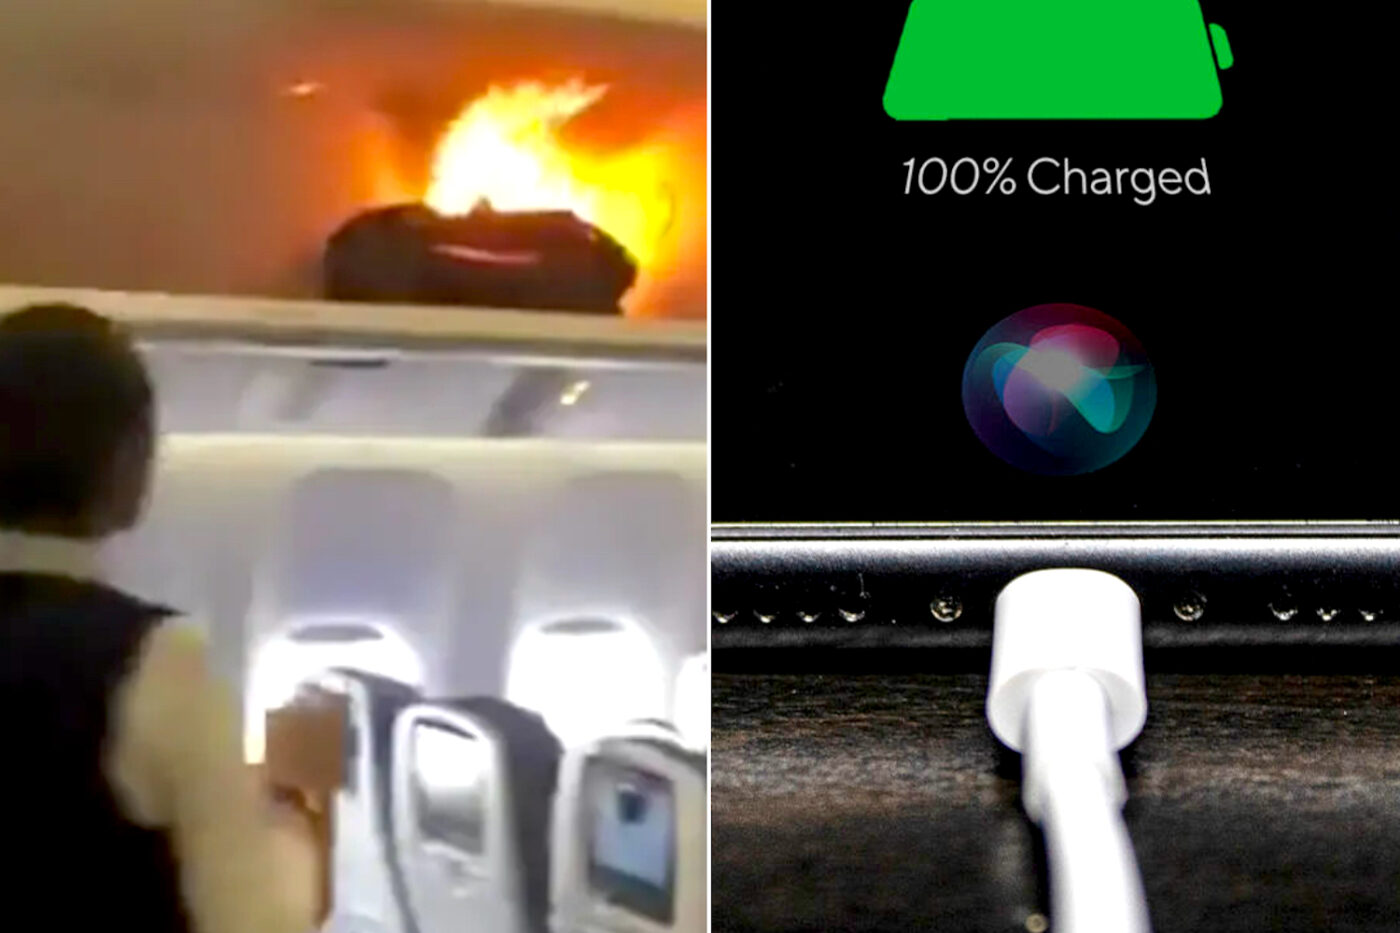 Flyers Warned Never To Travel With Fully-Charged Devices Amidst Spate Of Explosions